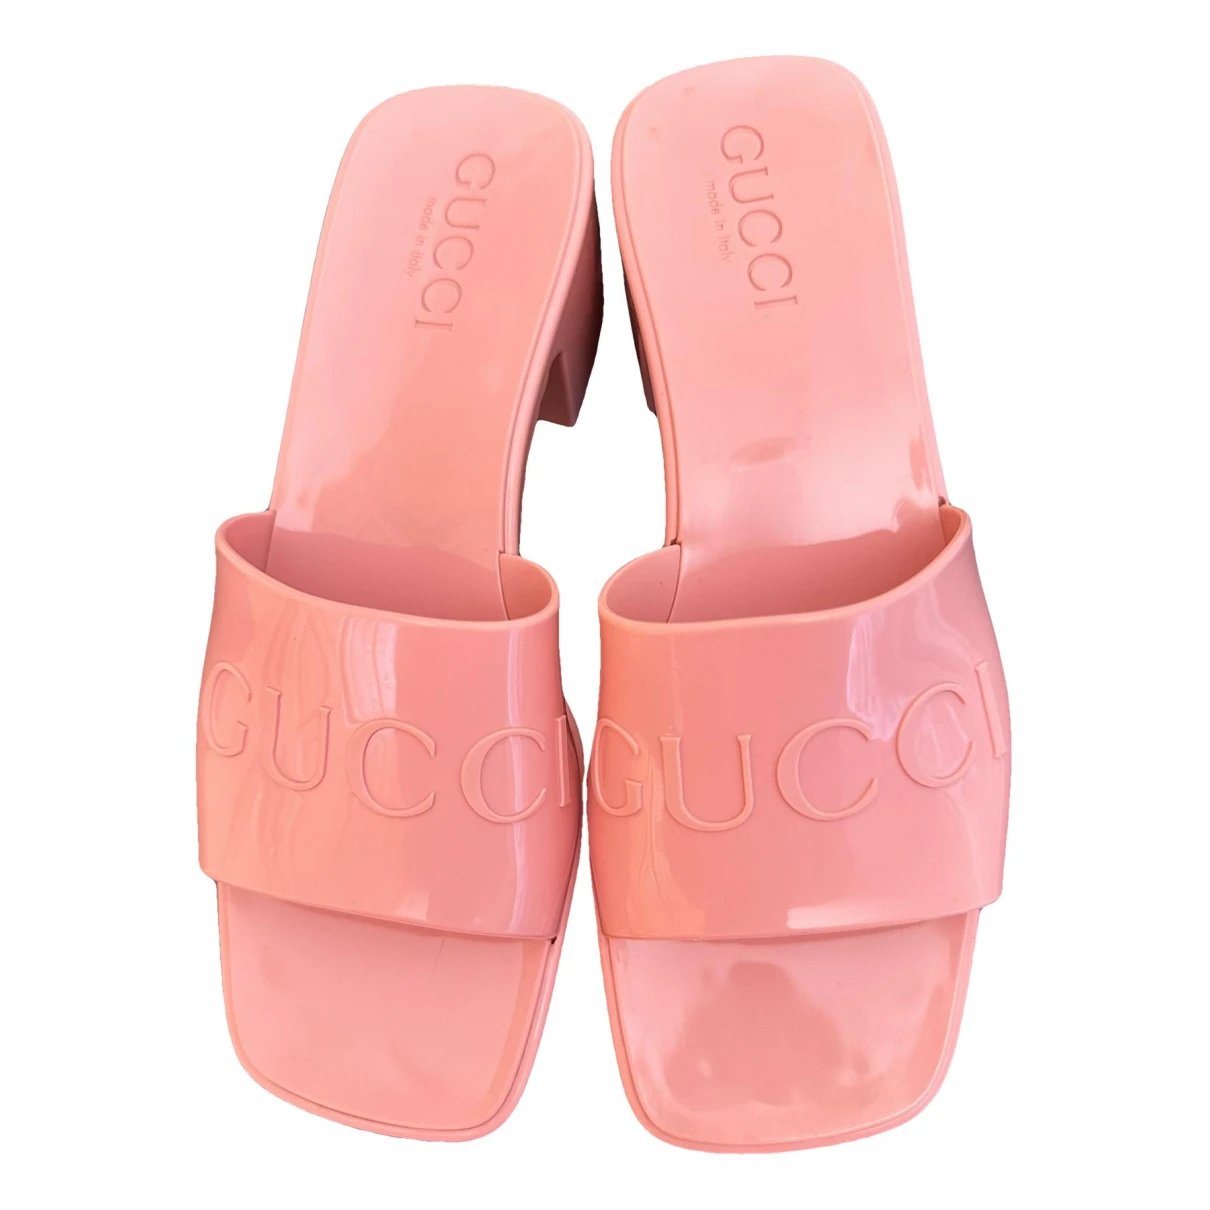 shoes Gucci mules & clogs for Female Rubber 35 EU. Used condition